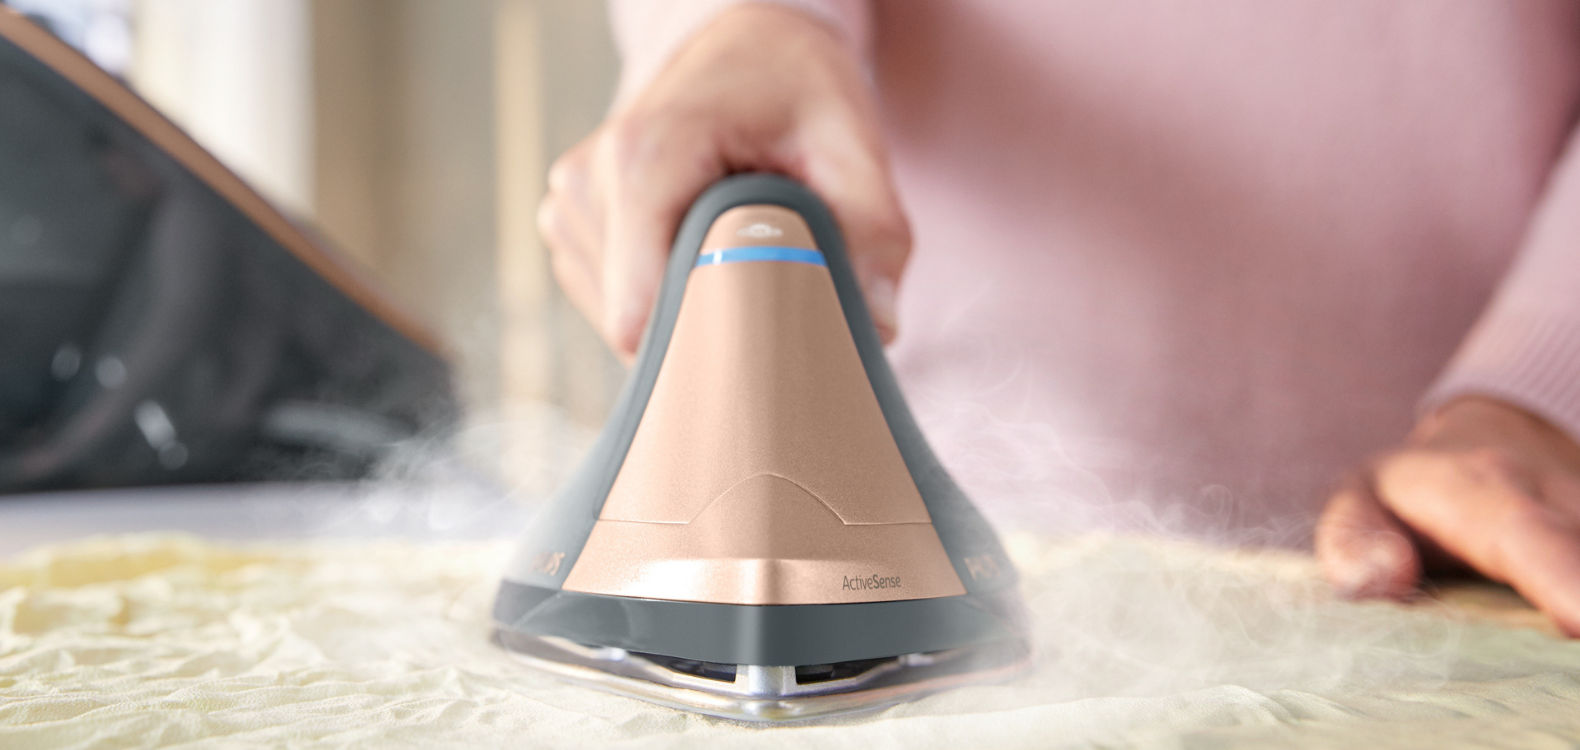 Review} Philips PerfectCare PSG steam iron